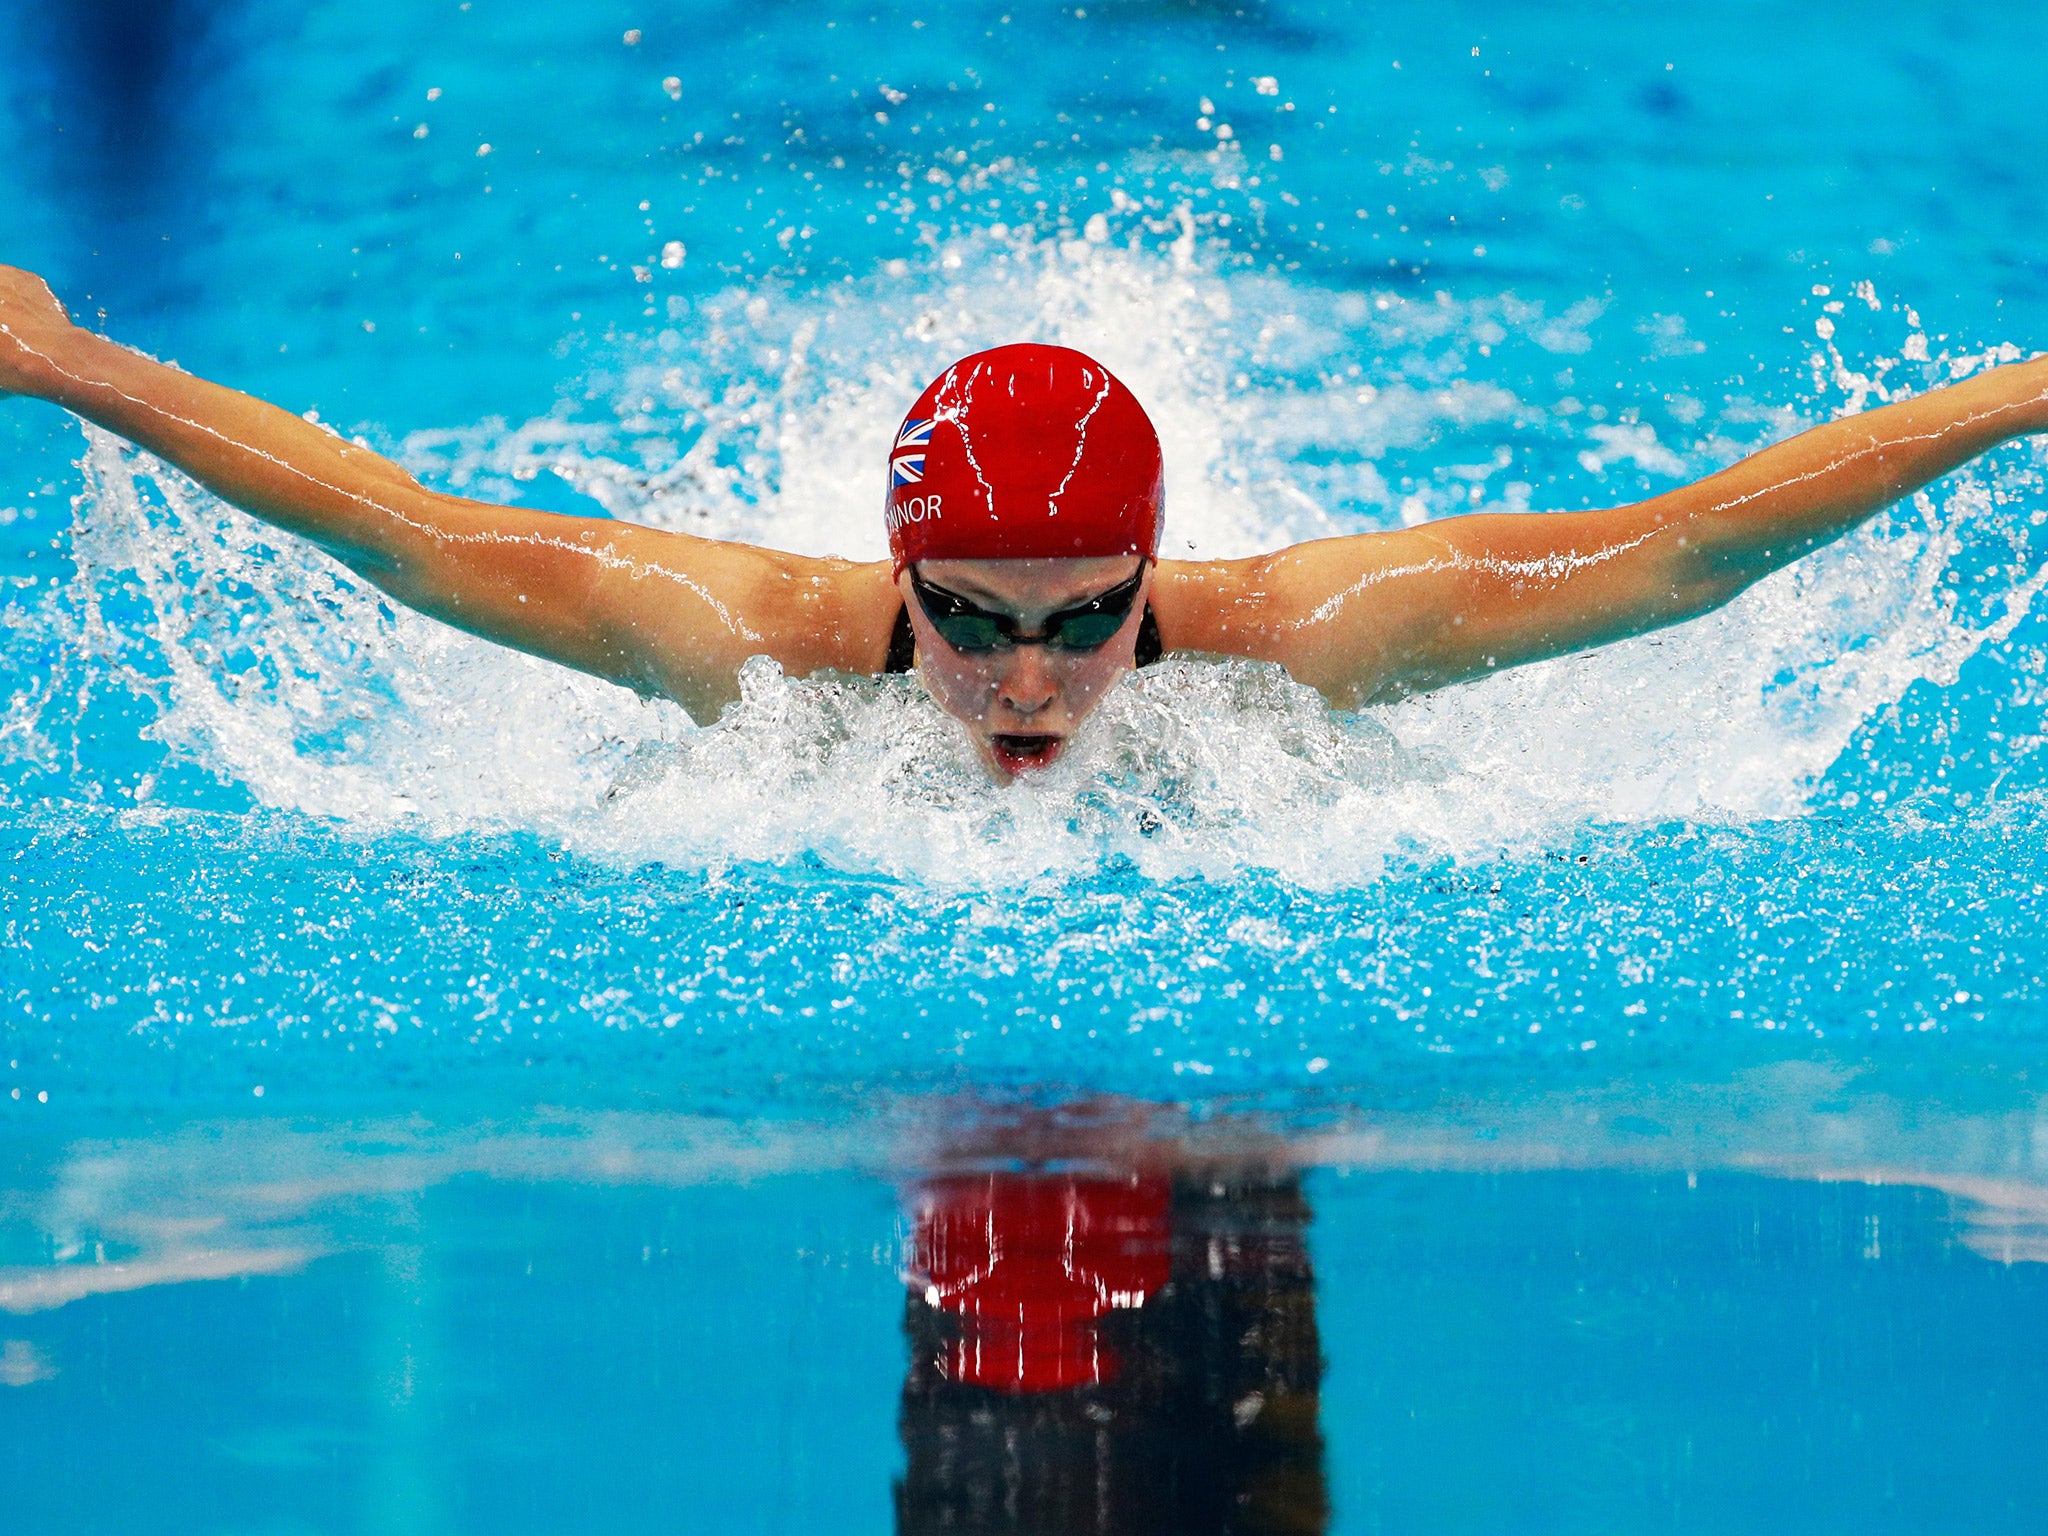 Siobhan-Marie O'Connor won silver in the women's 200m individual medley final